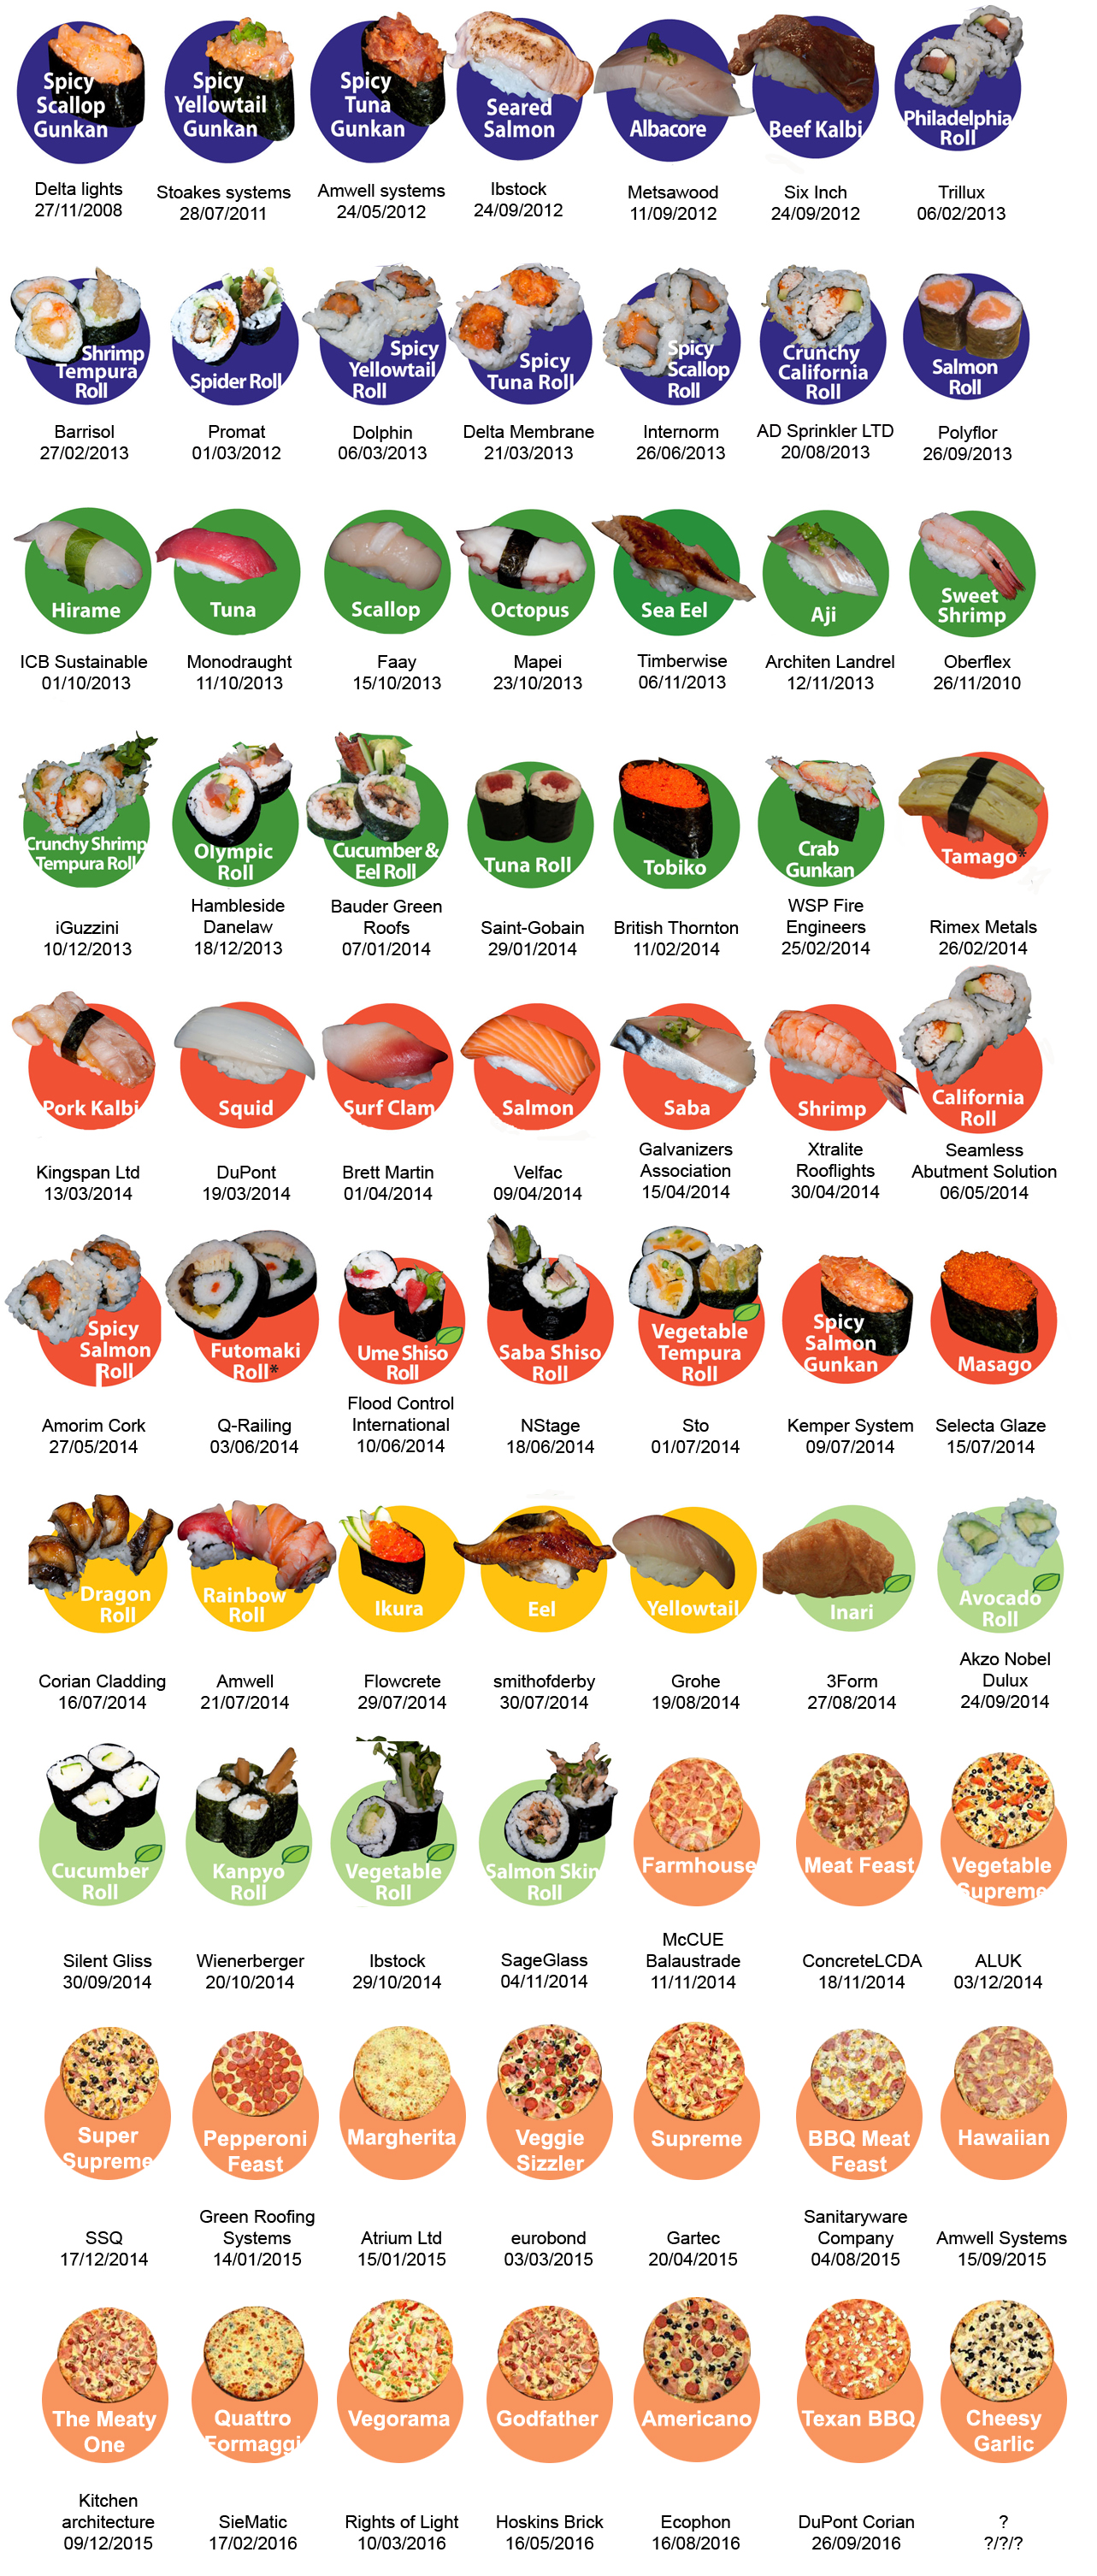 000off_sushi-and-pizza-cpd-calendar